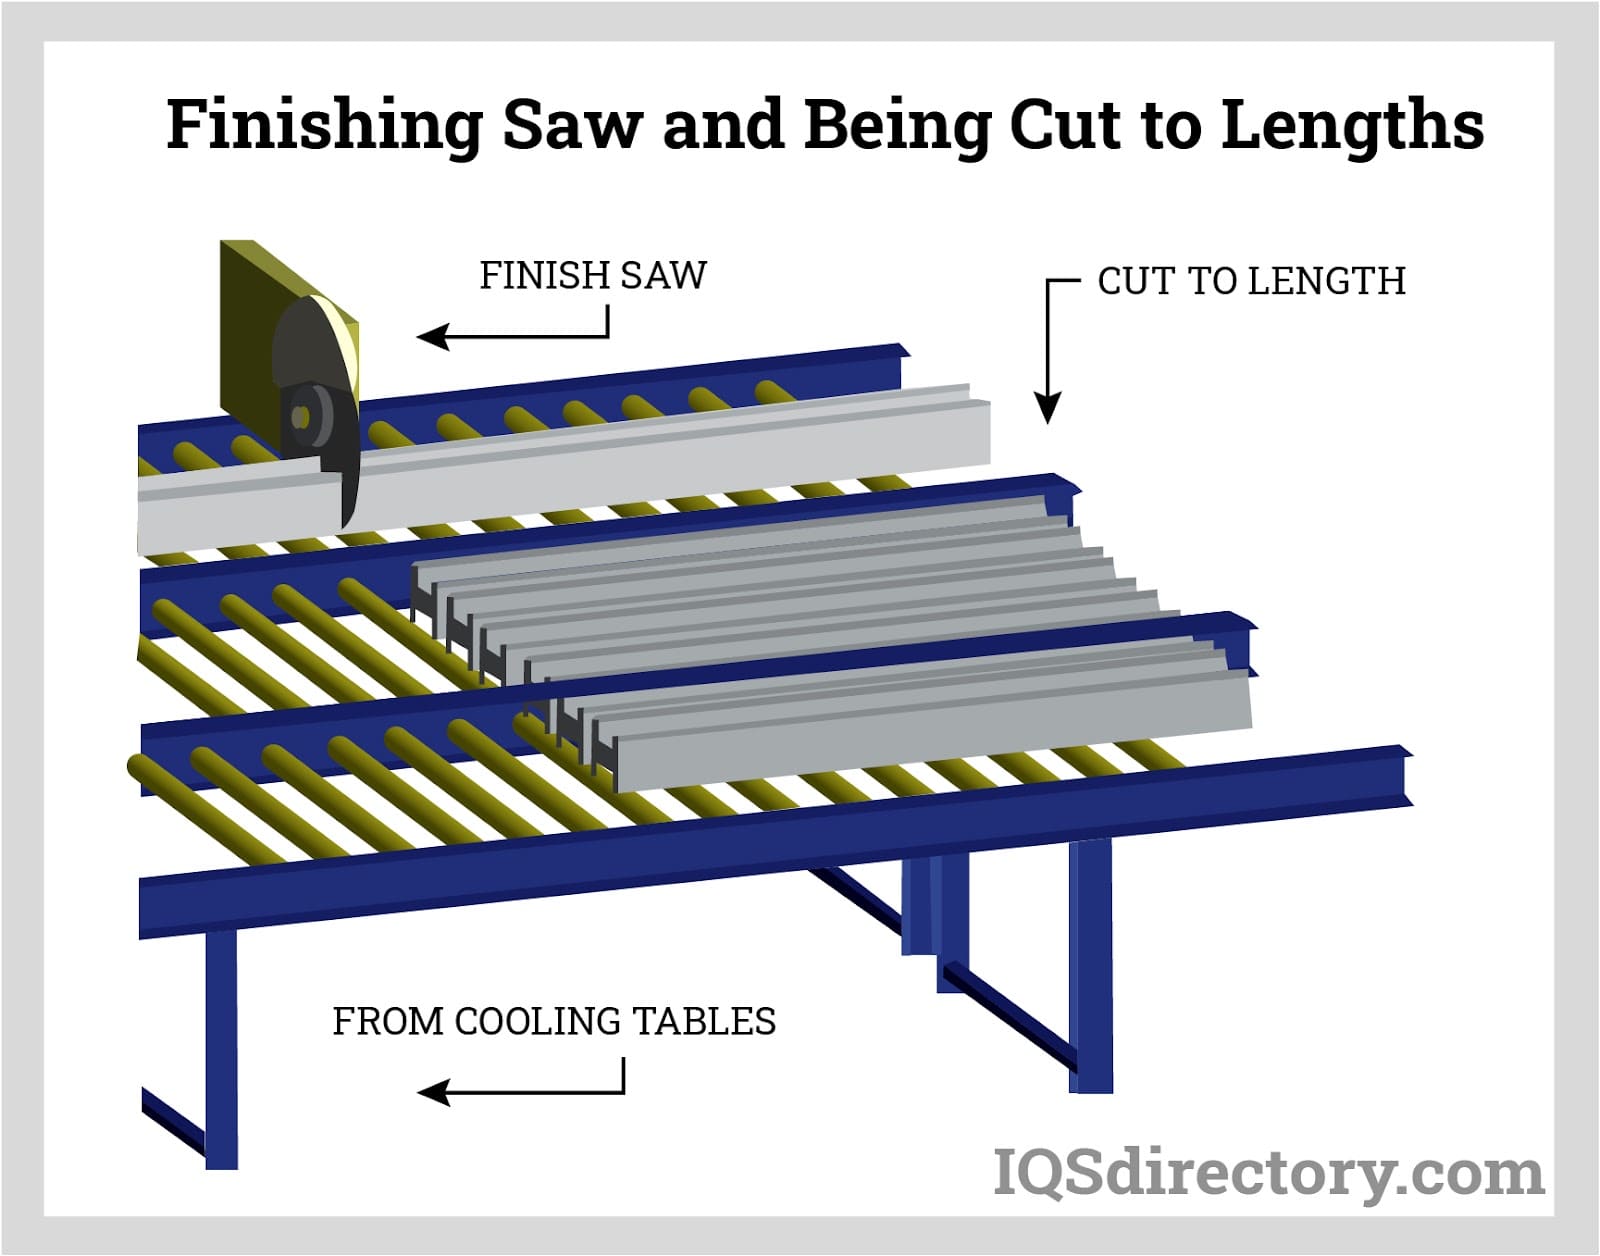 Finishing Saw and Being Cut to Lengths